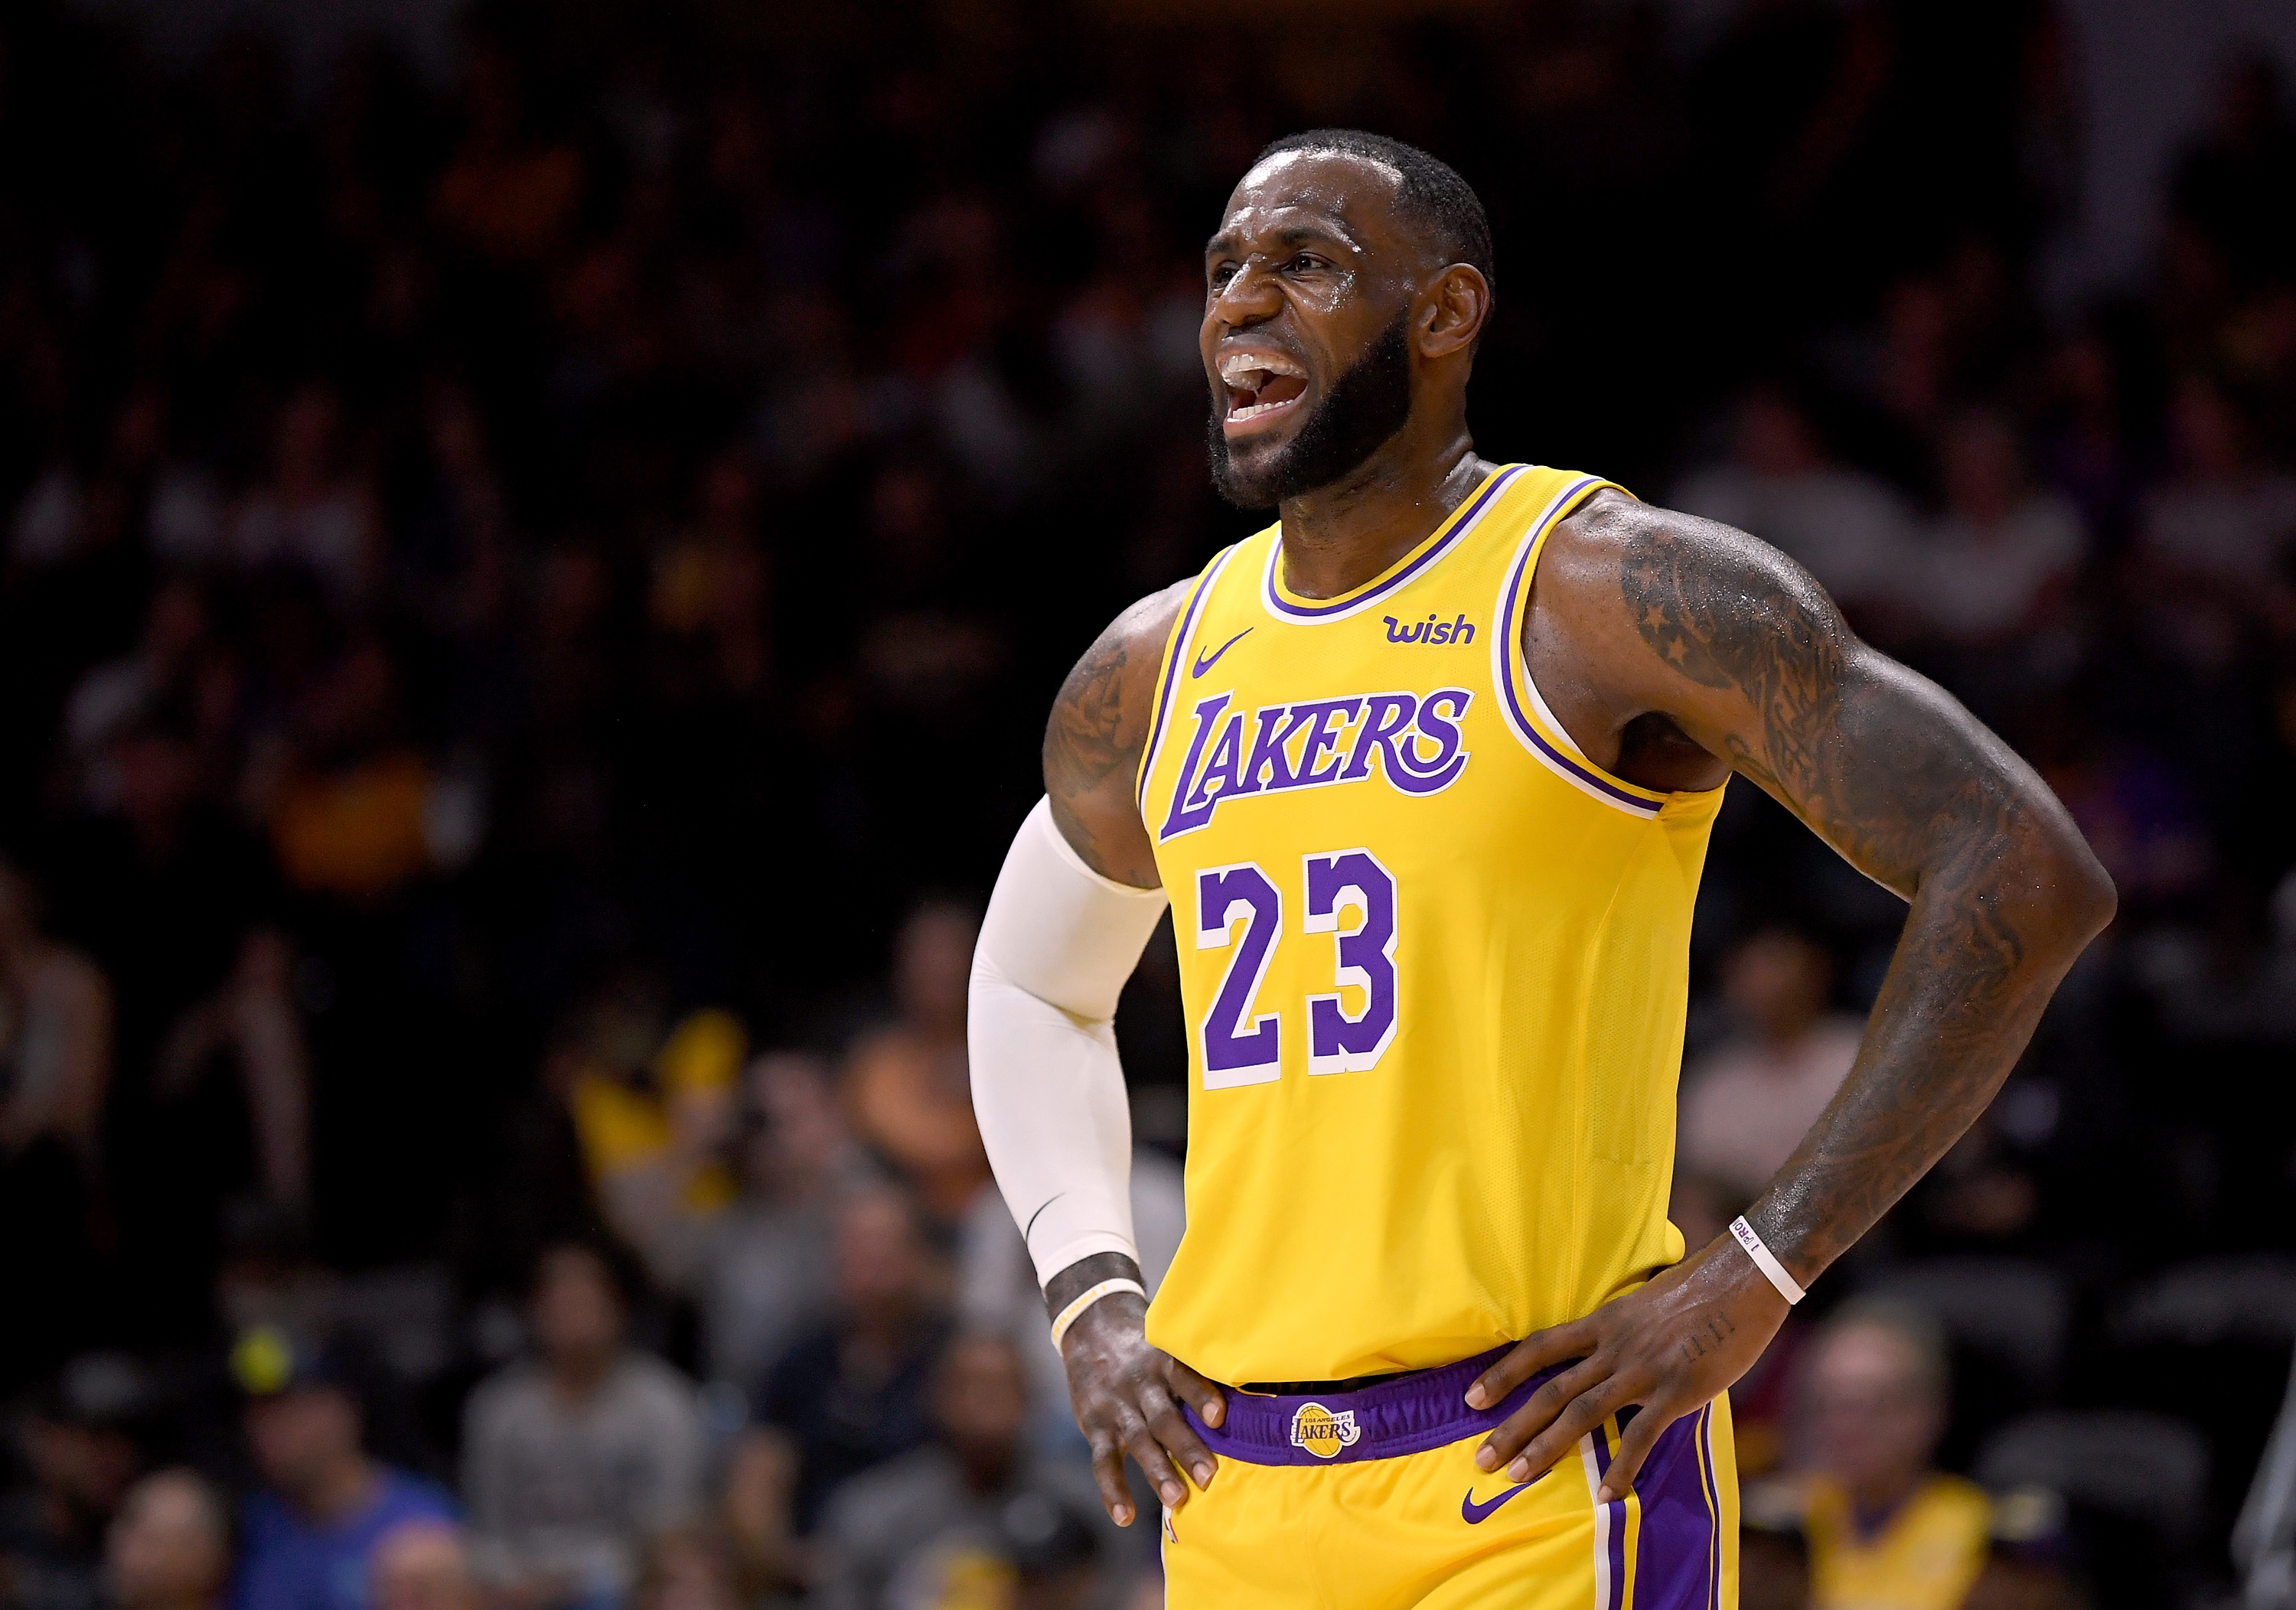 LeBron James shows off Tune Squad jersey in 'Space Jam' sequel